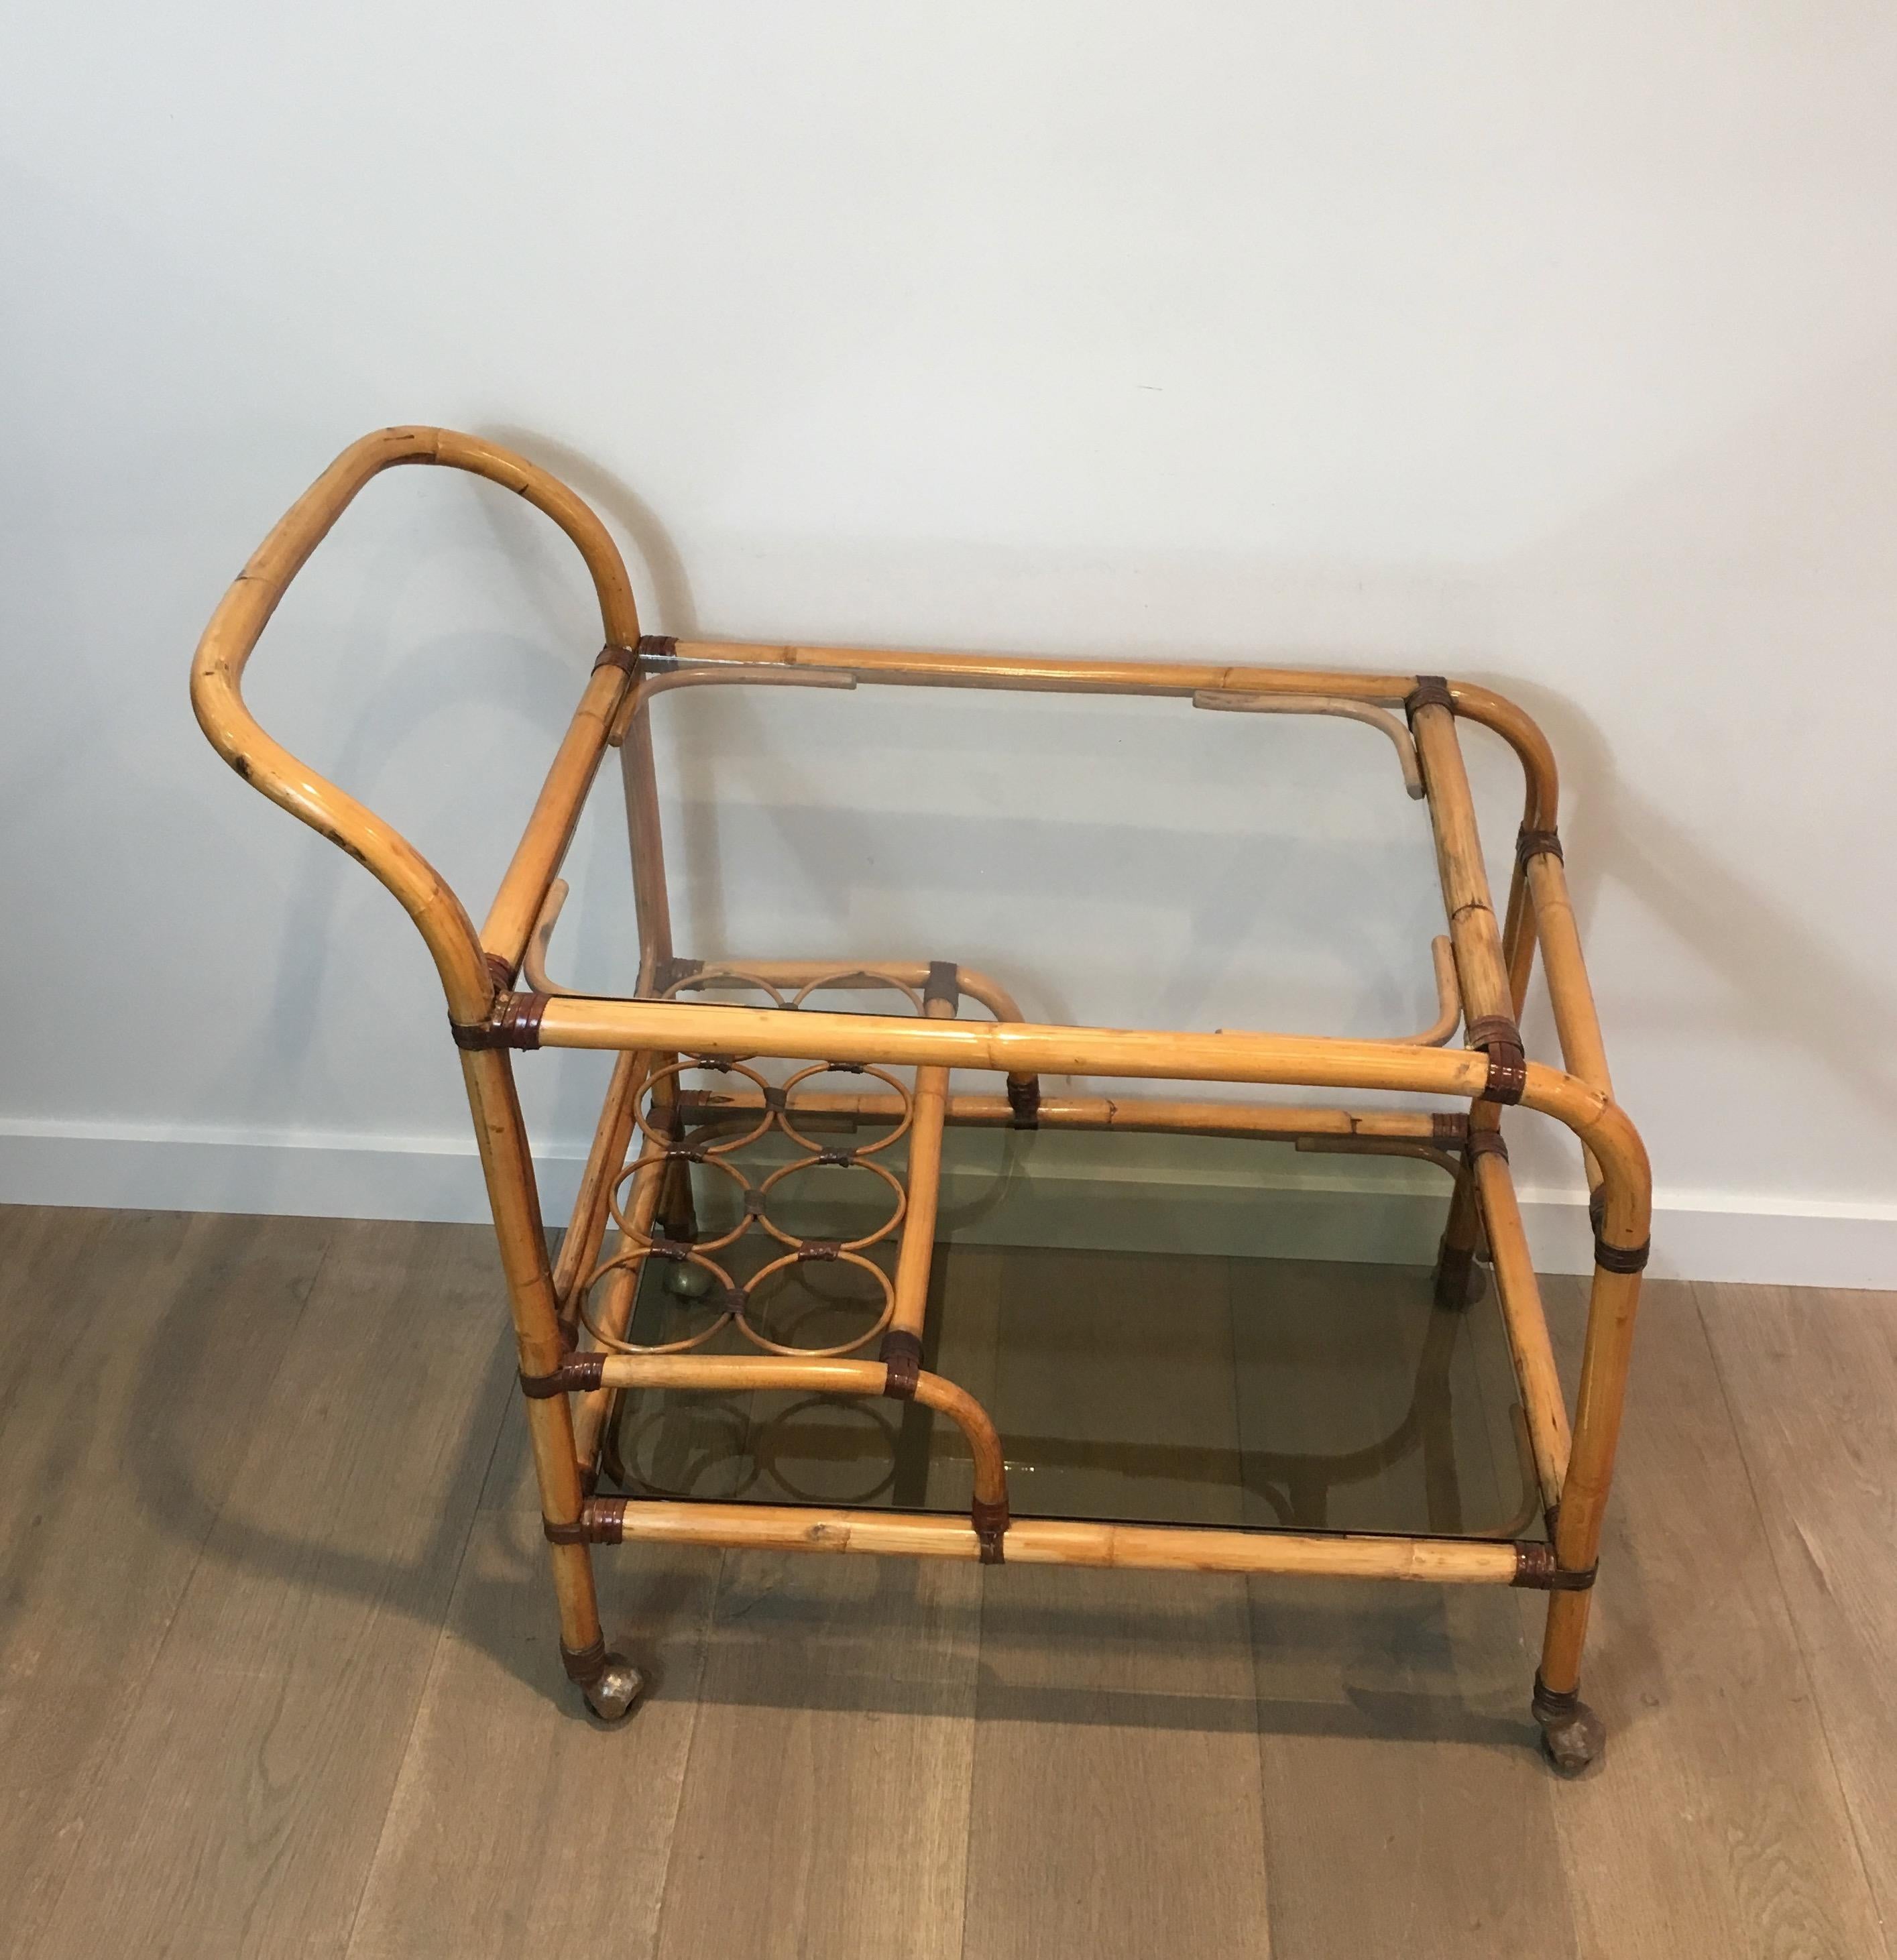 This interesting and unusual drinks trolley is made of rattan with leather links. This is a French work, circa 1950.